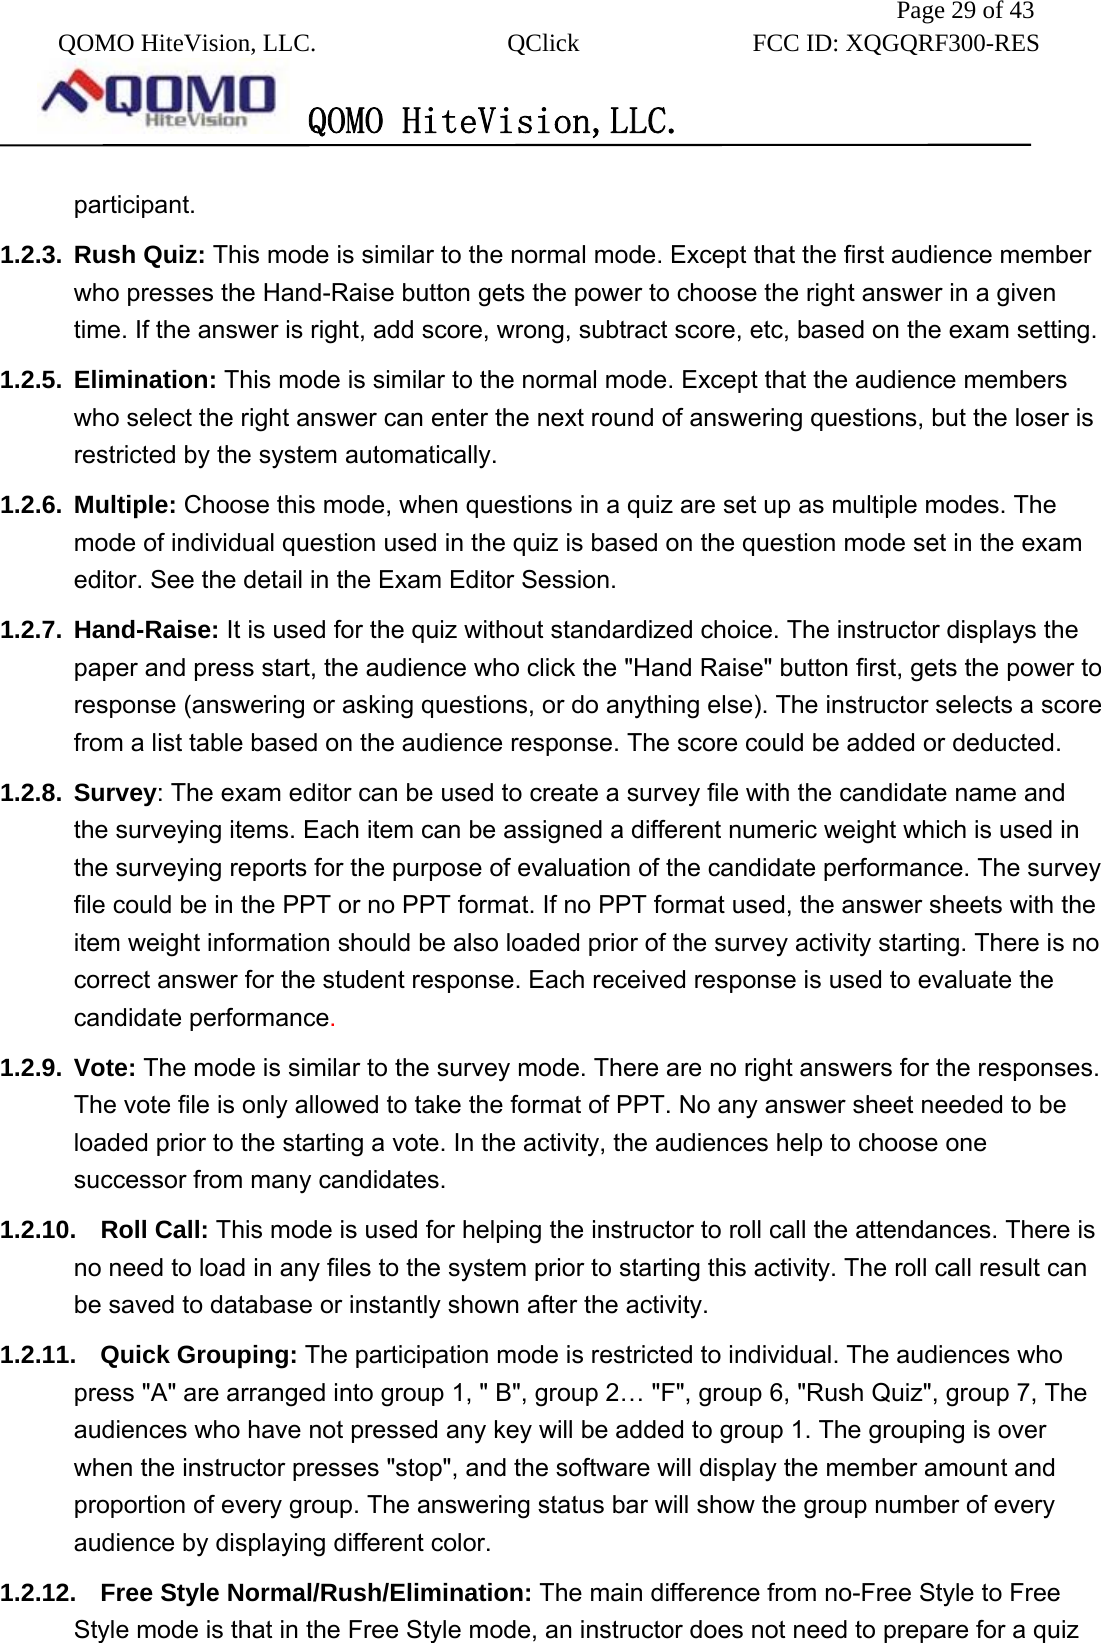               Page 29 of 43  QOMO HiteVision, LLC.  QClick        FCC ID: XQGQRF300-RES      QOMO HiteVision,LLC.   participant. 1.2.3. Rush Quiz: This mode is similar to the normal mode. Except that the first audience member who presses the Hand-Raise button gets the power to choose the right answer in a given time. If the answer is right, add score, wrong, subtract score, etc, based on the exam setting. 1.2.5. Elimination: This mode is similar to the normal mode. Except that the audience members who select the right answer can enter the next round of answering questions, but the loser is restricted by the system automatically. 1.2.6. Multiple: Choose this mode, when questions in a quiz are set up as multiple modes. The mode of individual question used in the quiz is based on the question mode set in the exam editor. See the detail in the Exam Editor Session. 1.2.7. Hand-Raise: It is used for the quiz without standardized choice. The instructor displays the paper and press start, the audience who click the &quot;Hand Raise&quot; button first, gets the power to response (answering or asking questions, or do anything else). The instructor selects a score from a list table based on the audience response. The score could be added or deducted. 1.2.8. Survey: The exam editor can be used to create a survey file with the candidate name and the surveying items. Each item can be assigned a different numeric weight which is used in the surveying reports for the purpose of evaluation of the candidate performance. The survey file could be in the PPT or no PPT format. If no PPT format used, the answer sheets with the item weight information should be also loaded prior of the survey activity starting. There is no correct answer for the student response. Each received response is used to evaluate the candidate performance. 1.2.9. Vote: The mode is similar to the survey mode. There are no right answers for the responses. The vote file is only allowed to take the format of PPT. No any answer sheet needed to be loaded prior to the starting a vote. In the activity, the audiences help to choose one successor from many candidates. 1.2.10. Roll Call: This mode is used for helping the instructor to roll call the attendances. There is no need to load in any files to the system prior to starting this activity. The roll call result can be saved to database or instantly shown after the activity. 1.2.11. Quick Grouping: The participation mode is restricted to individual. The audiences who press &quot;A&quot; are arranged into group 1, &quot; B&quot;, group 2… &quot;F&quot;, group 6, &quot;Rush Quiz&quot;, group 7, The audiences who have not pressed any key will be added to group 1. The grouping is over when the instructor presses &quot;stop&quot;, and the software will display the member amount and proportion of every group. The answering status bar will show the group number of every audience by displaying different color. 1.2.12.  Free Style Normal/Rush/Elimination: The main difference from no-Free Style to Free Style mode is that in the Free Style mode, an instructor does not need to prepare for a quiz 